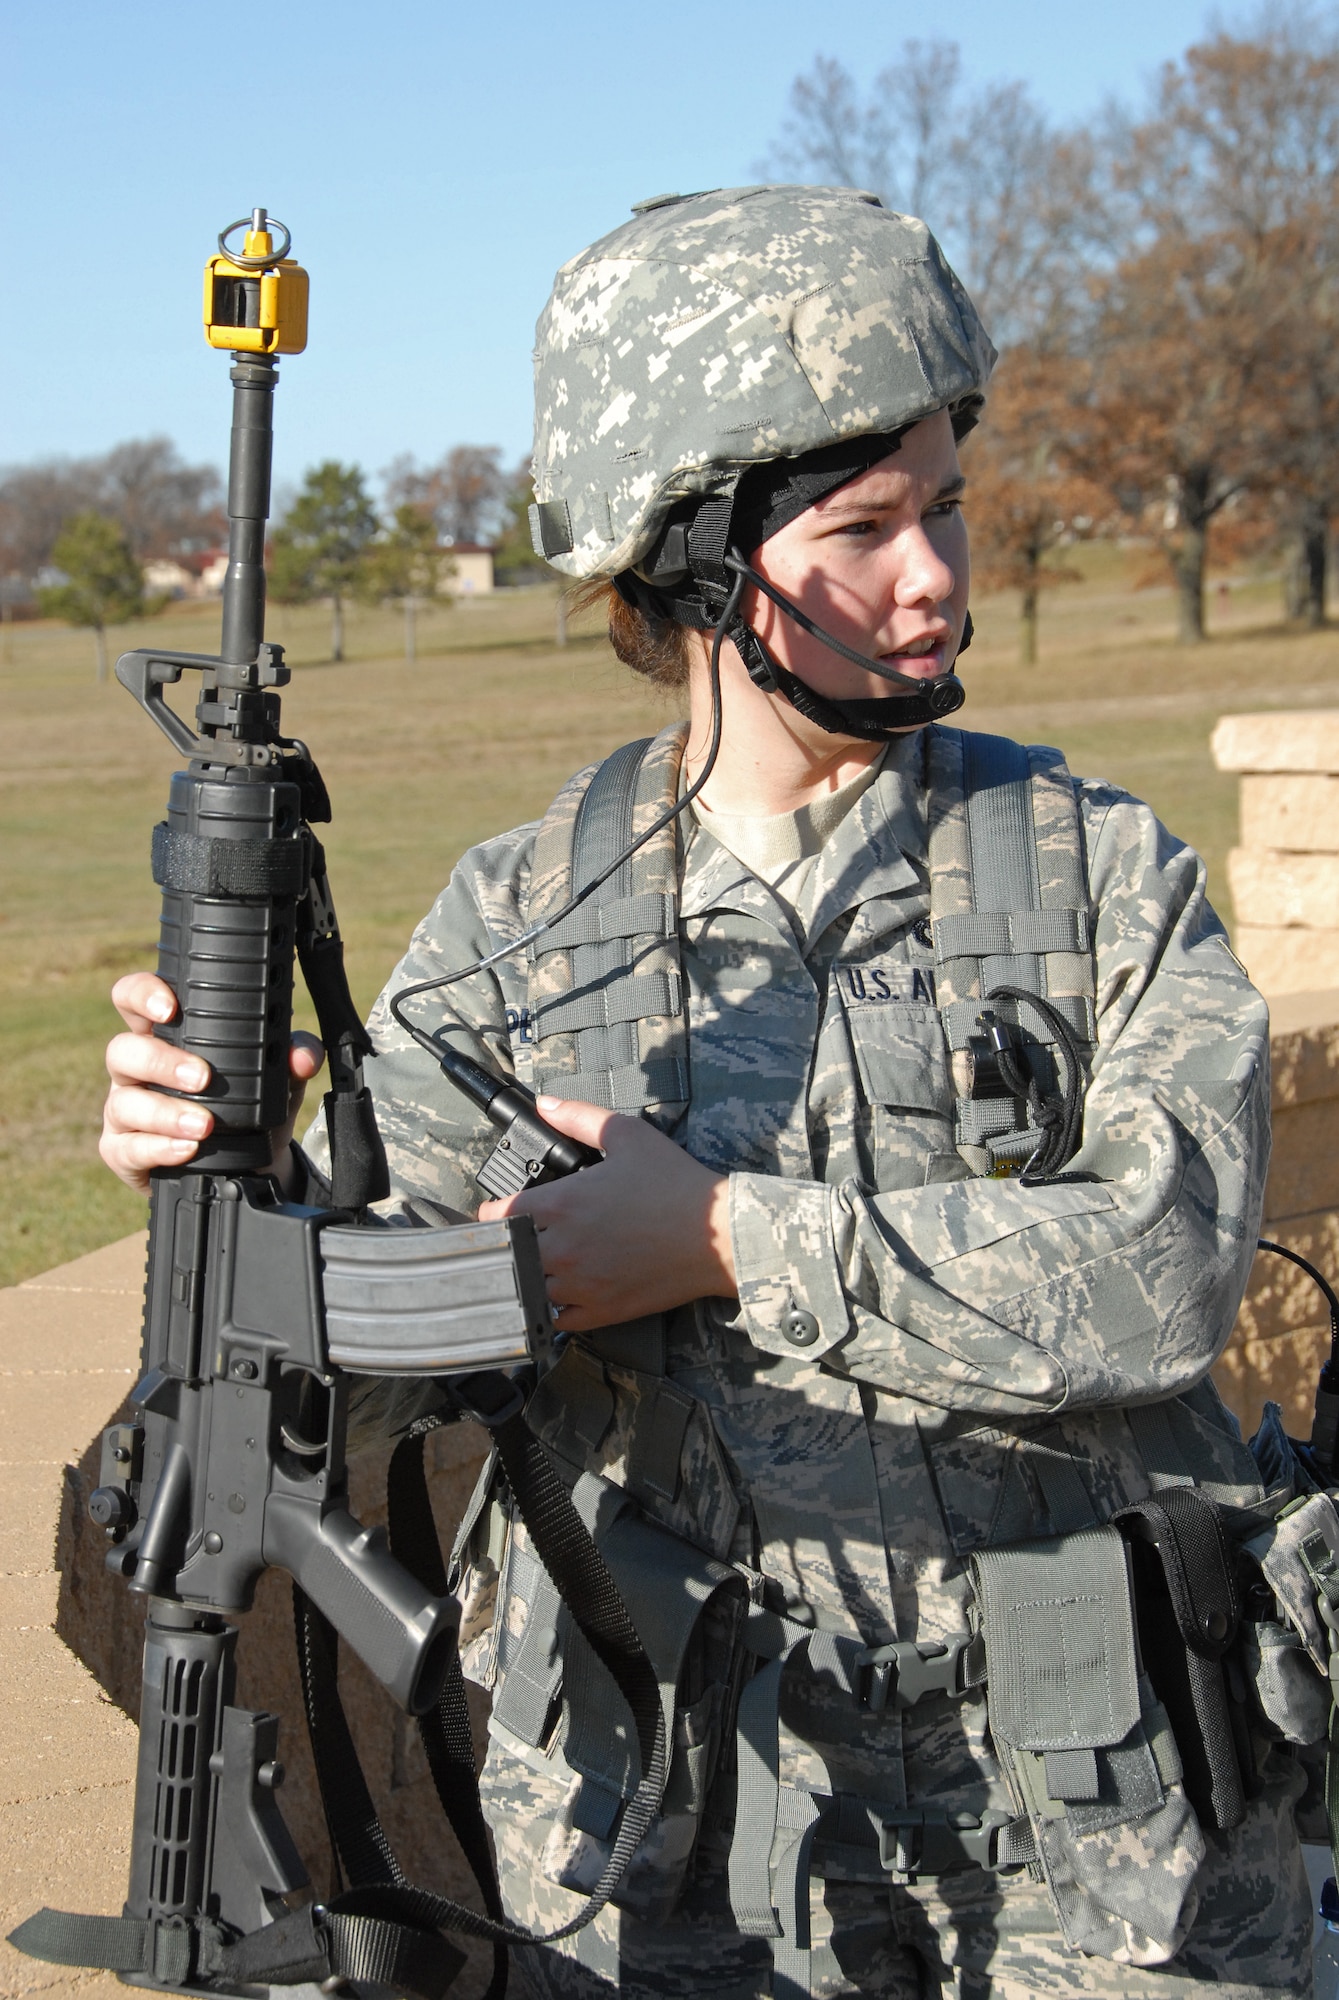 Airman 1st Class Angela Peterson, fire team member with the 115th Fighter Wing Security Forces performs a functional check of her radio equipment prior to beginning a combat training exercise at Volk Field, Air National Guard Base, Camp Douglas, Wis. Nov. 7, 2009.The Madison, Wis. based 115th Security Forces Squadron engaged in a variety of combat training exercises as part of their November Unit Training Assembly. (U.S. Air Force photo by Master Sgt. Paul Gorman)